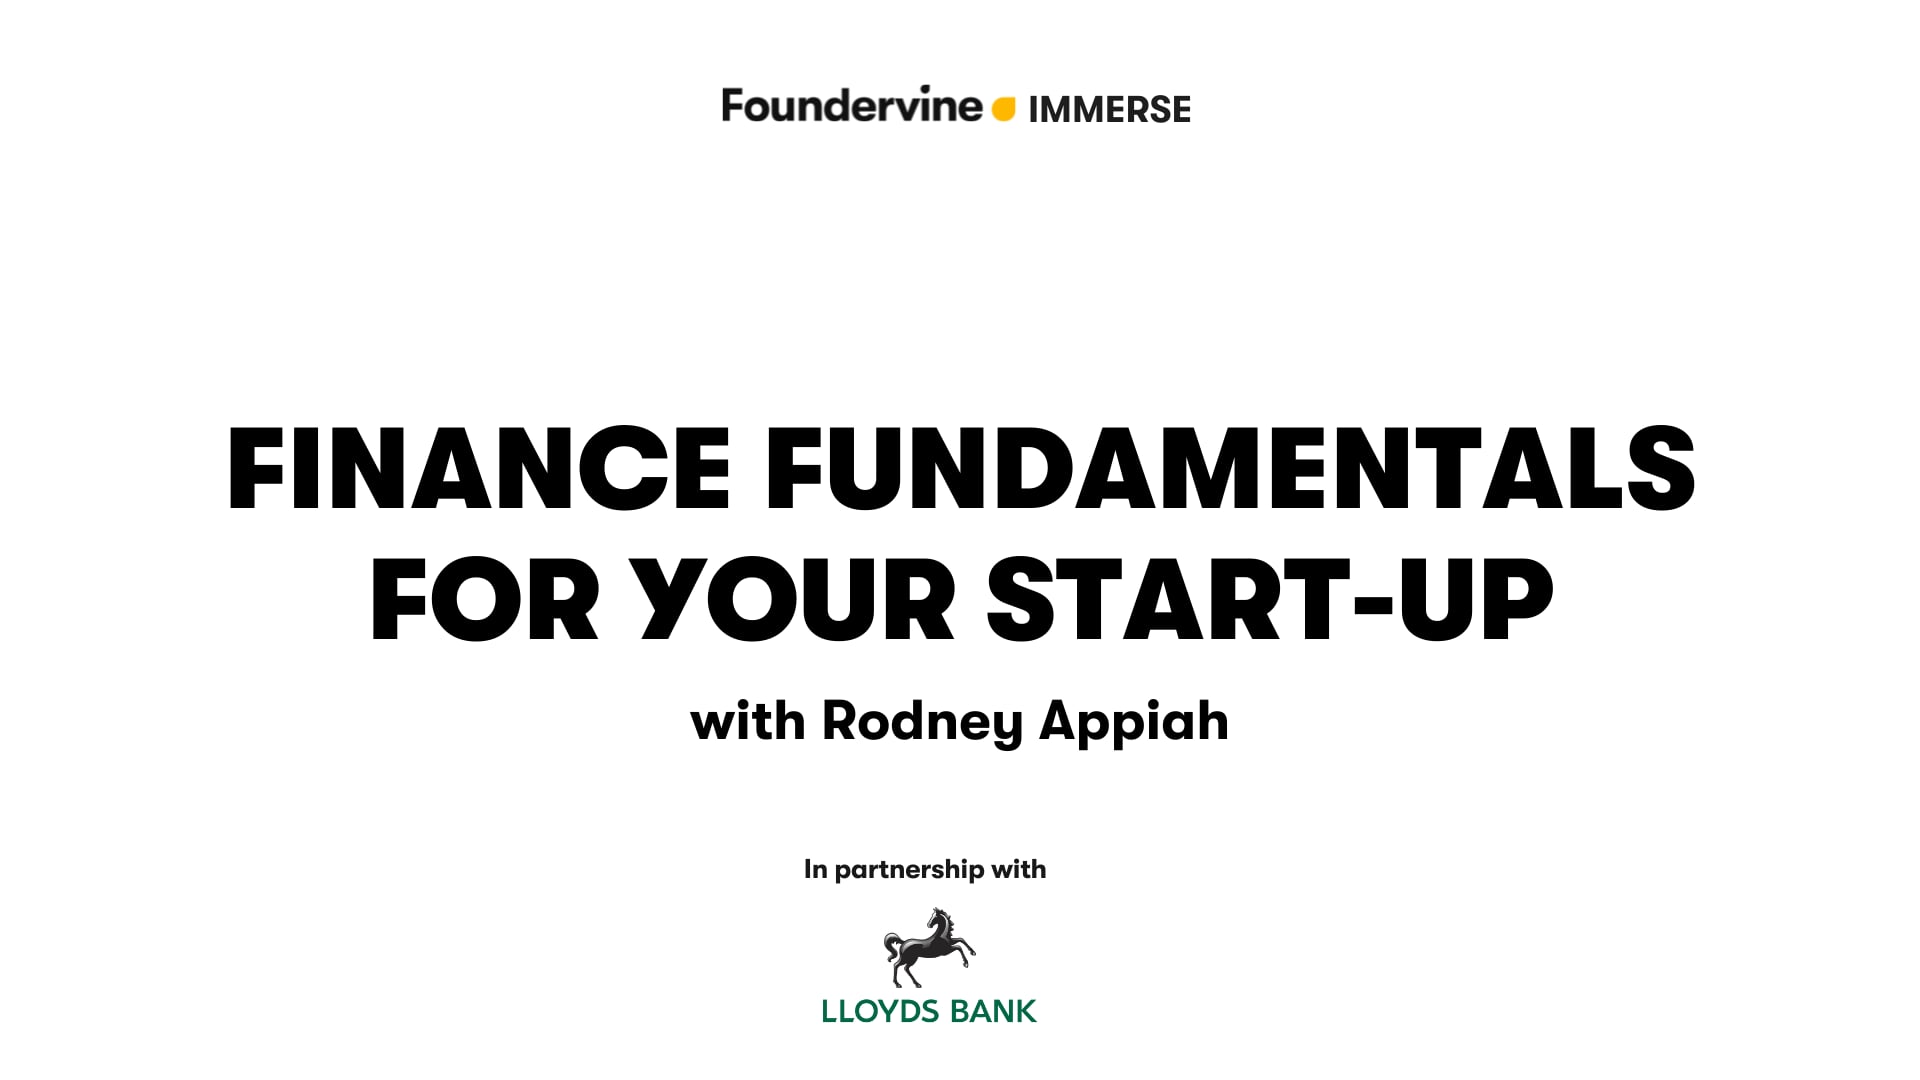 Finance fundamentals for your start-up with Rodney Appiah